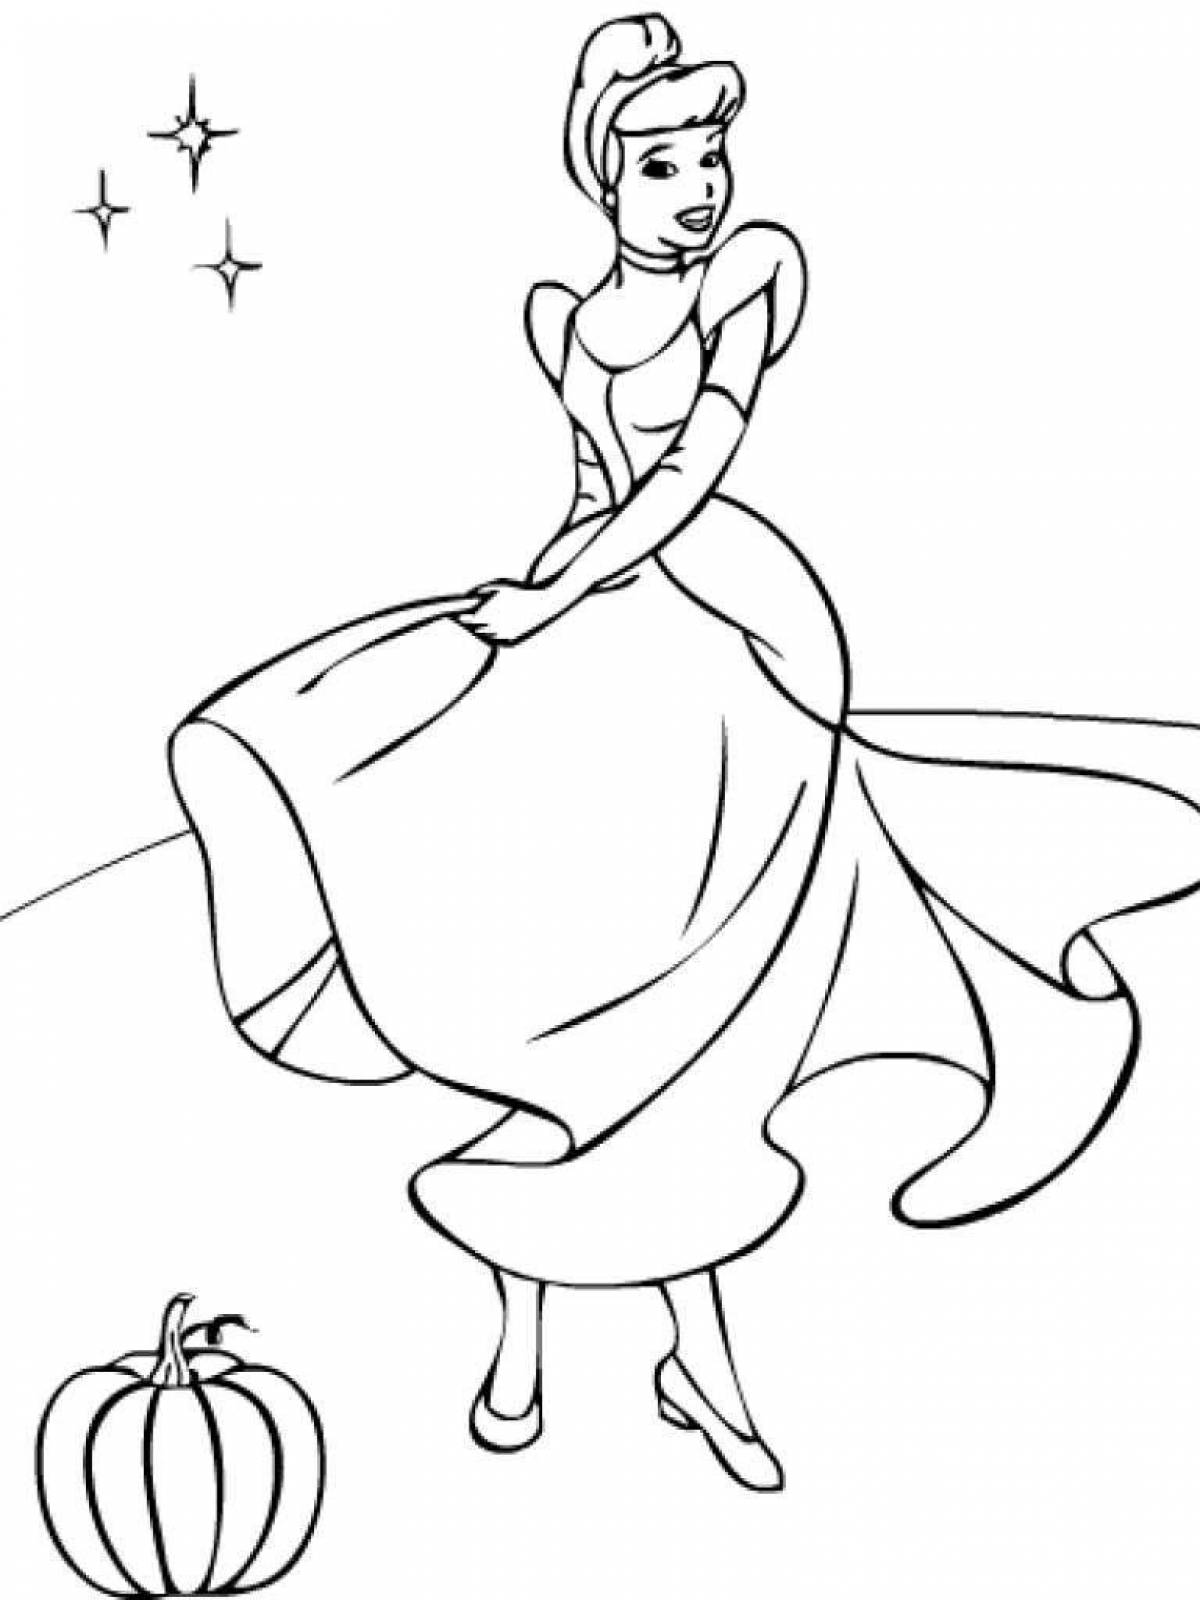 Playful Cinderella coloring page for kids